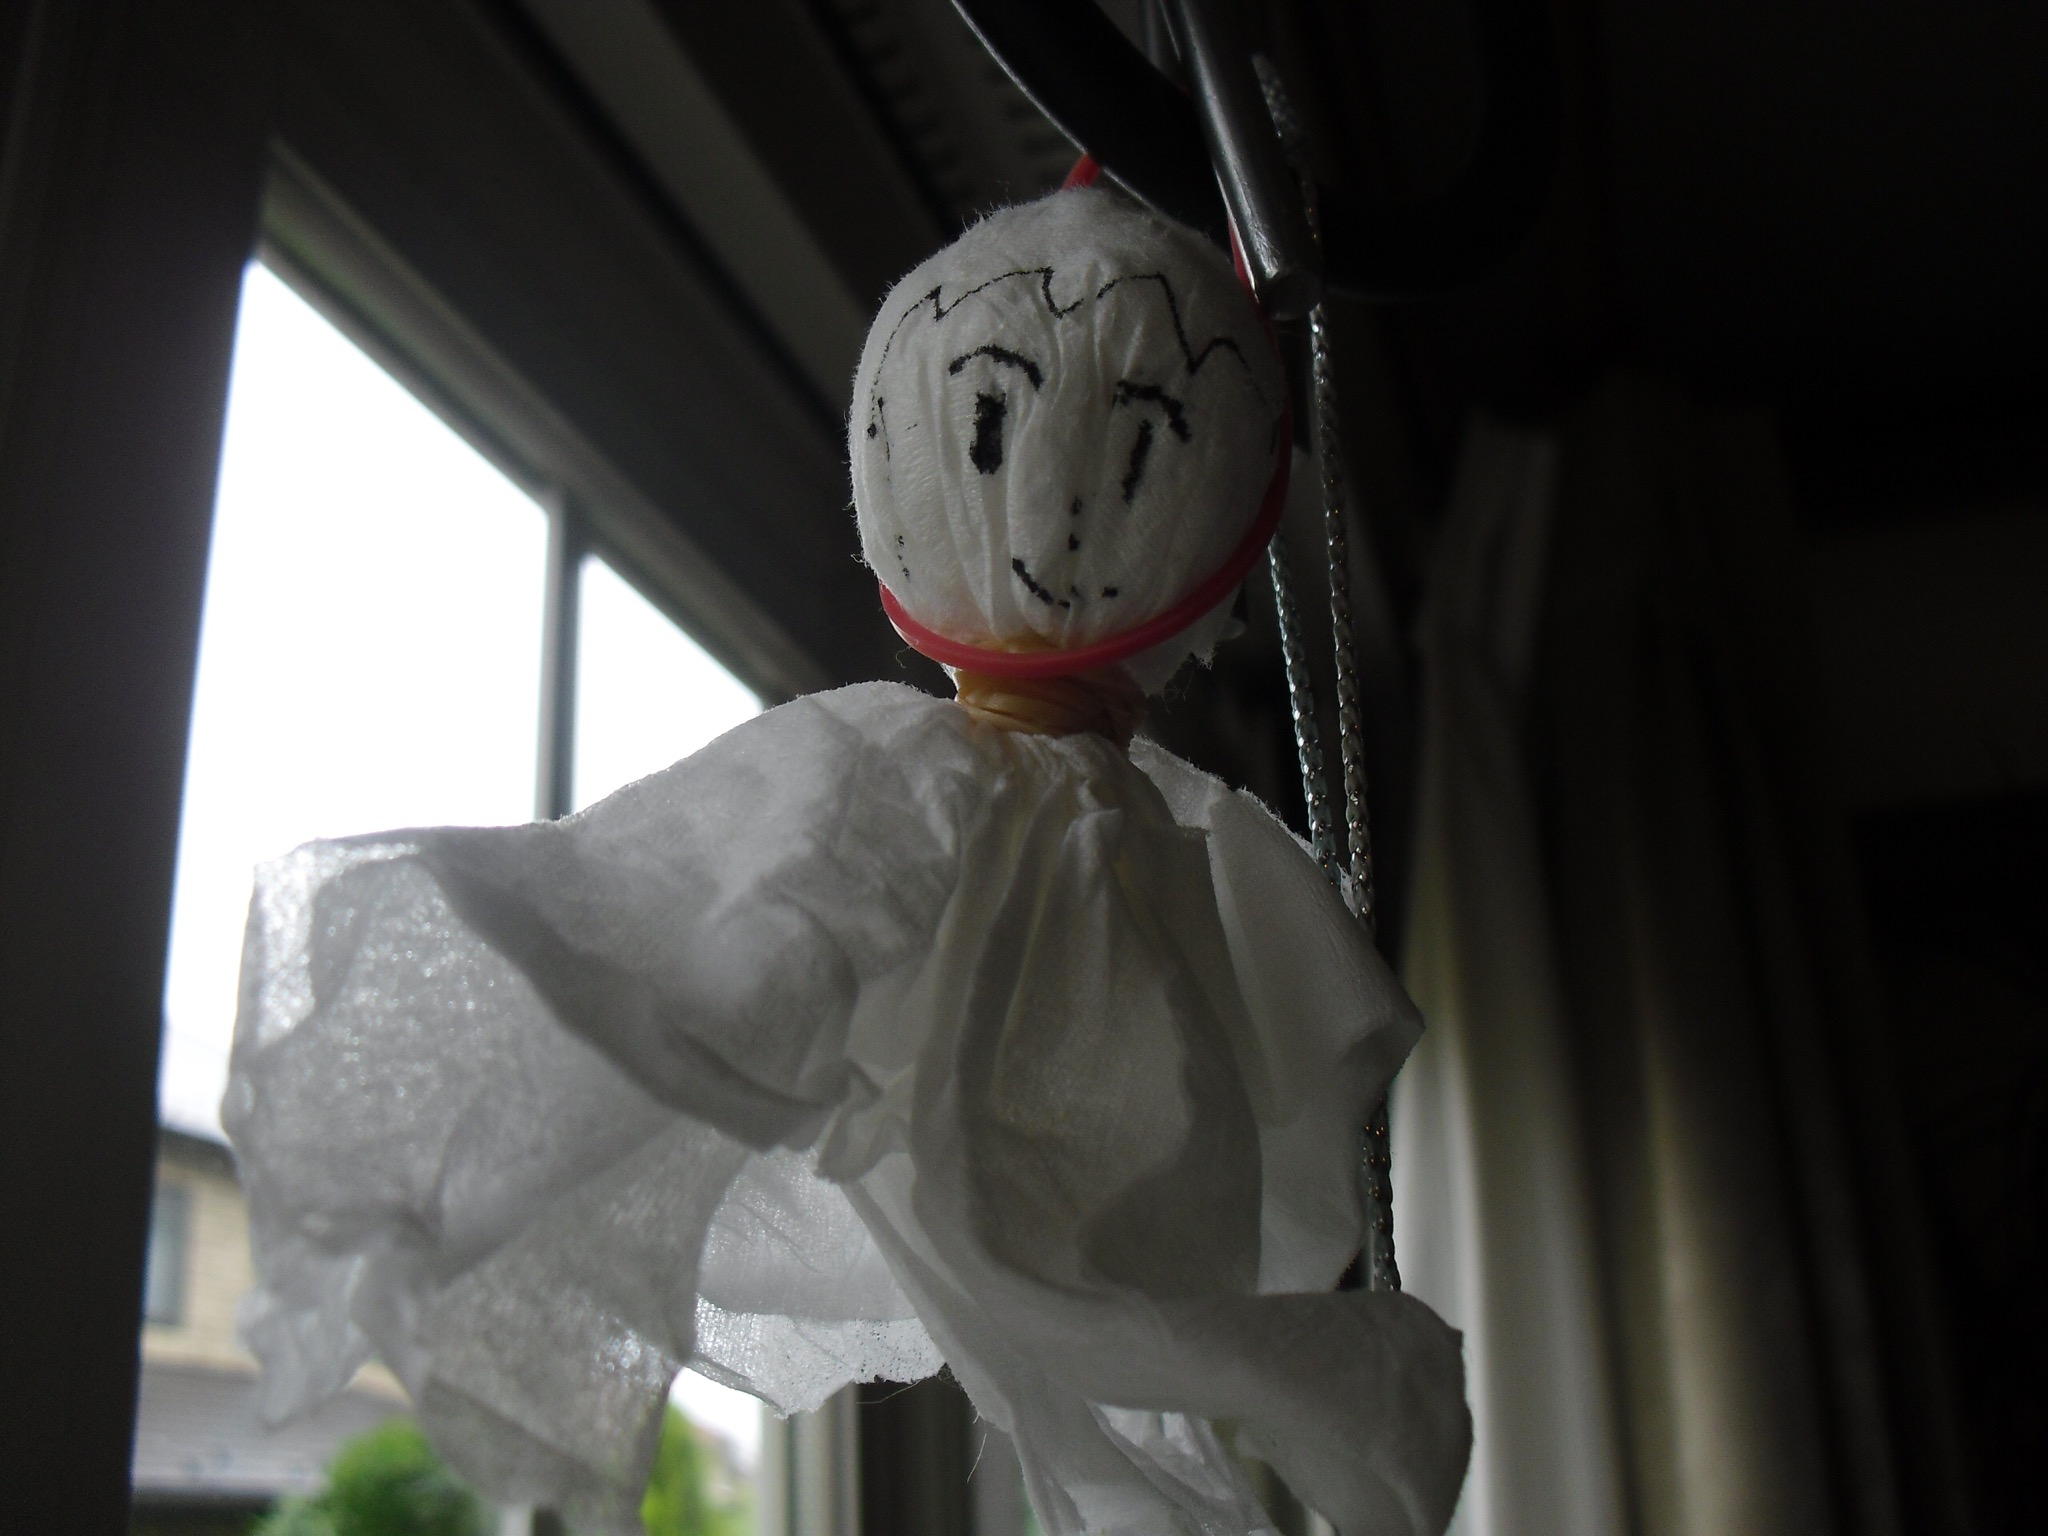 One indication that I have not experienced the persistent rainy season yet is that I haven't seen any 'thru thru bozo' hanging in windows or outside. They are said to be common when people want the rain to go away. Something to look forward to! (Image source: japanesemythologywordpress.com) 